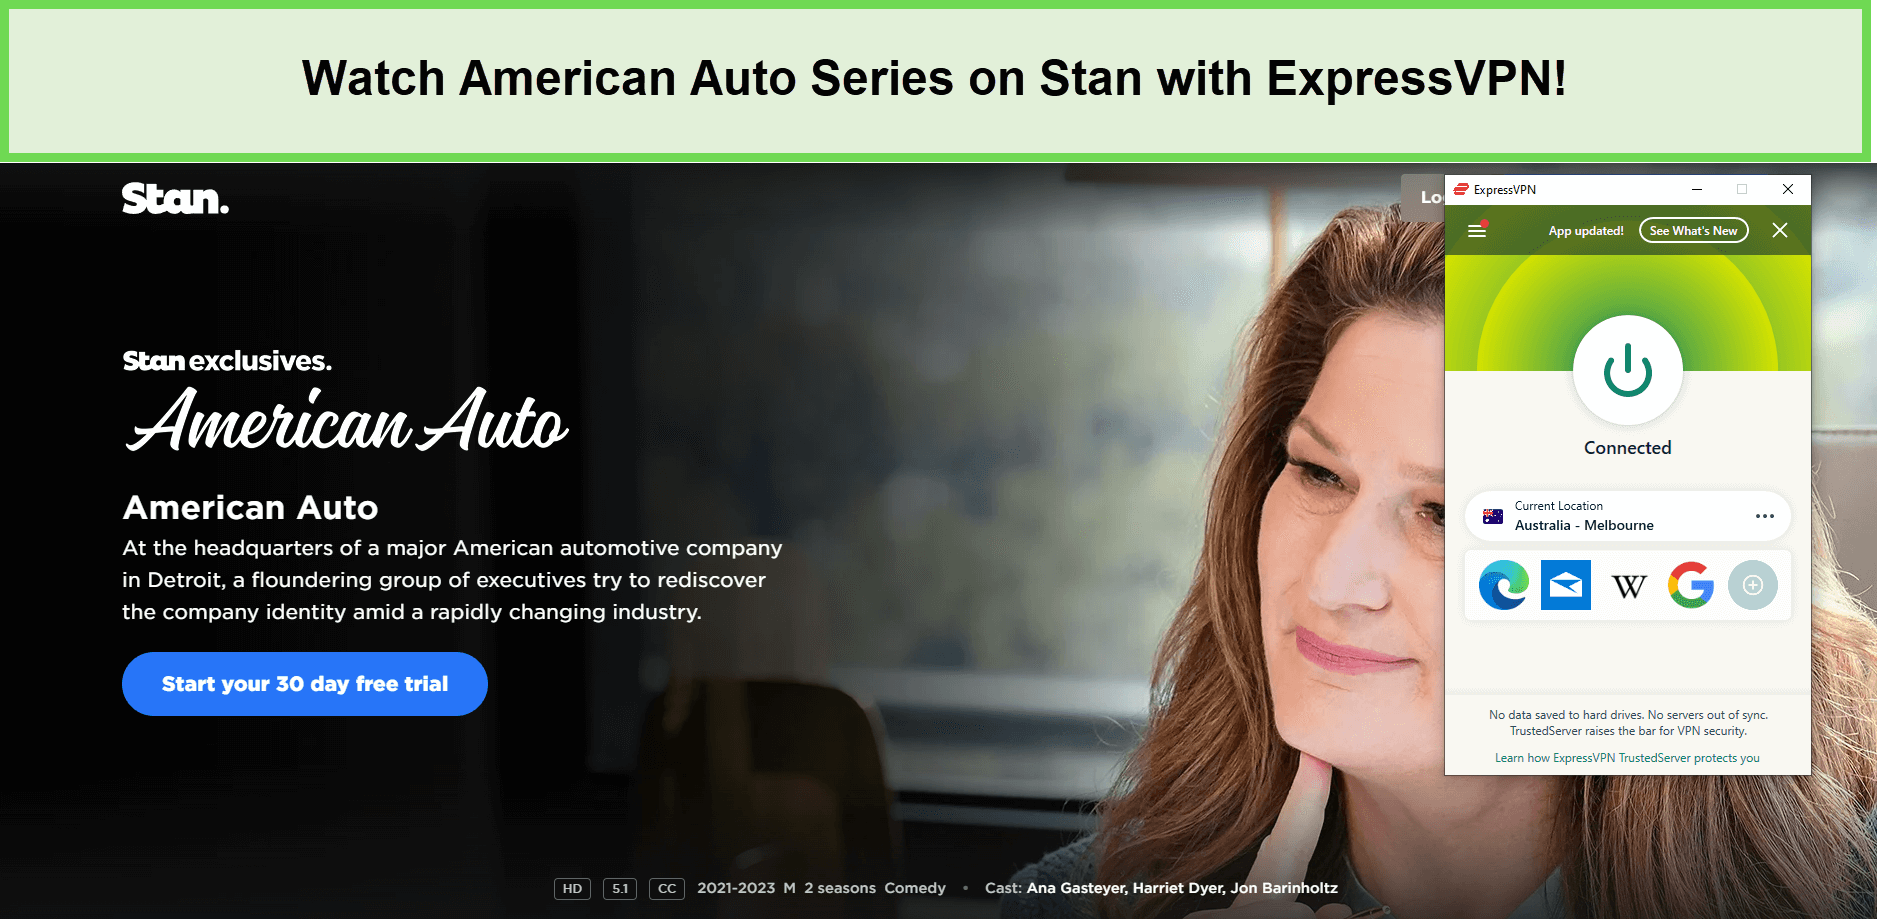 Watch-American-Auto-Series-in-Netherlands-on-Stan-with-ExpressVPN